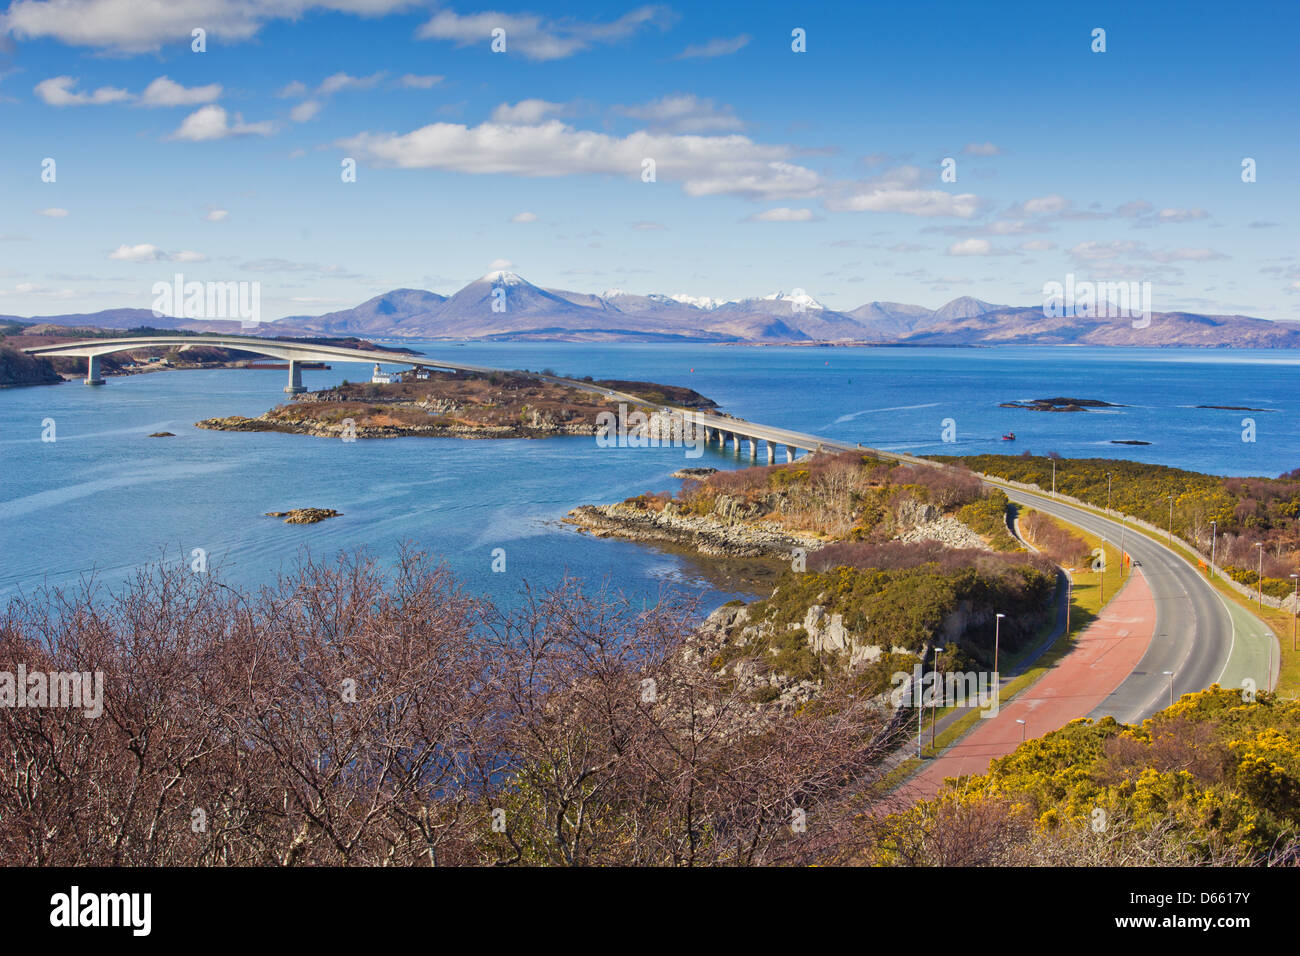 SKYE BRIDGE WITH SNOW CAPPED CUILLIN MOUNTAIN RANGE AND LOCH ALSH ON AN EARLY SPRING DAY IN THE WESTERN HIGHLANDS OF SCOTLAND Stock Photo